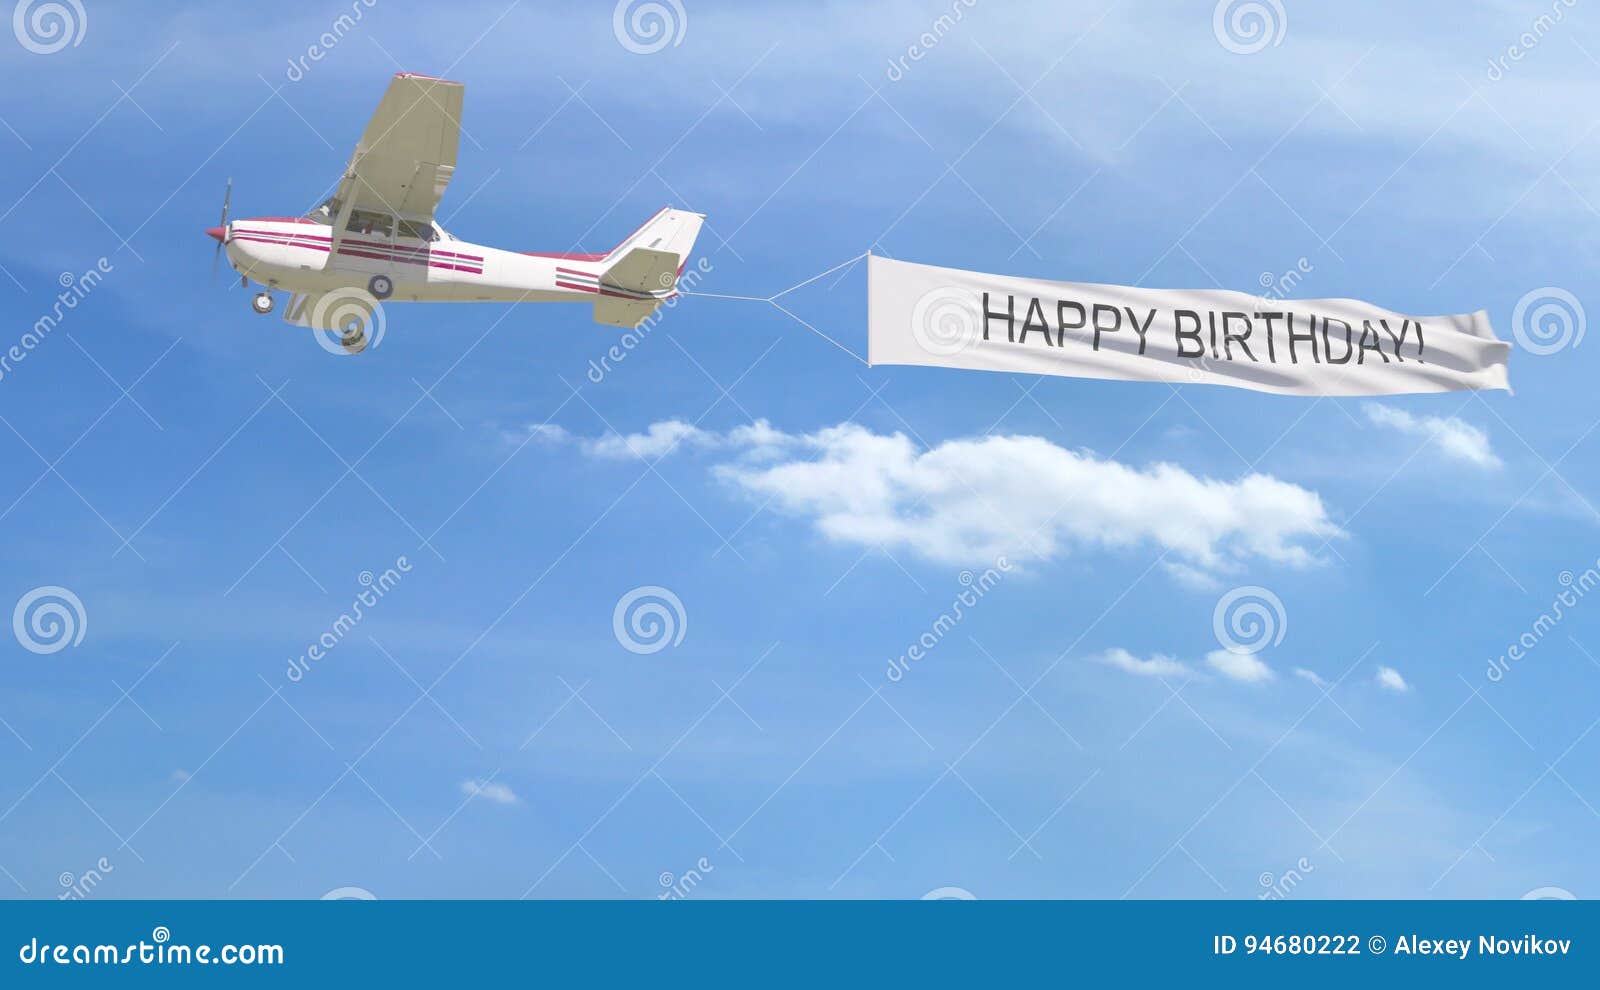 Small Propeller Airplane Towing Banner With Happy Birthday Caption In The Sky 3d Rendering Stock Illustration Illustration Of Clouds Daylight